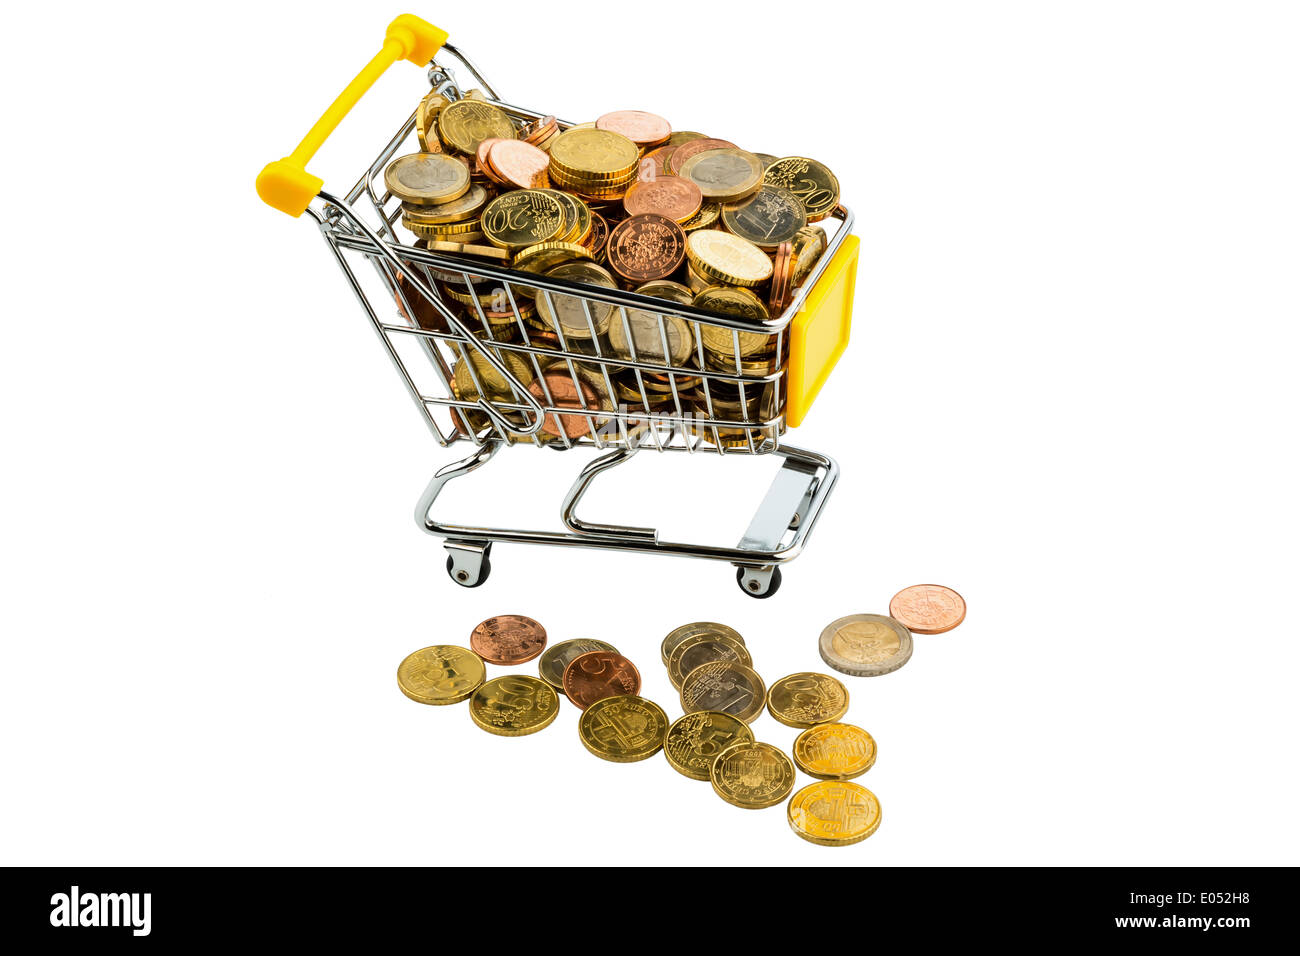 A shopping cart is well filled with eurocoins, symbolic photo for buying power and consumption Stock Photo